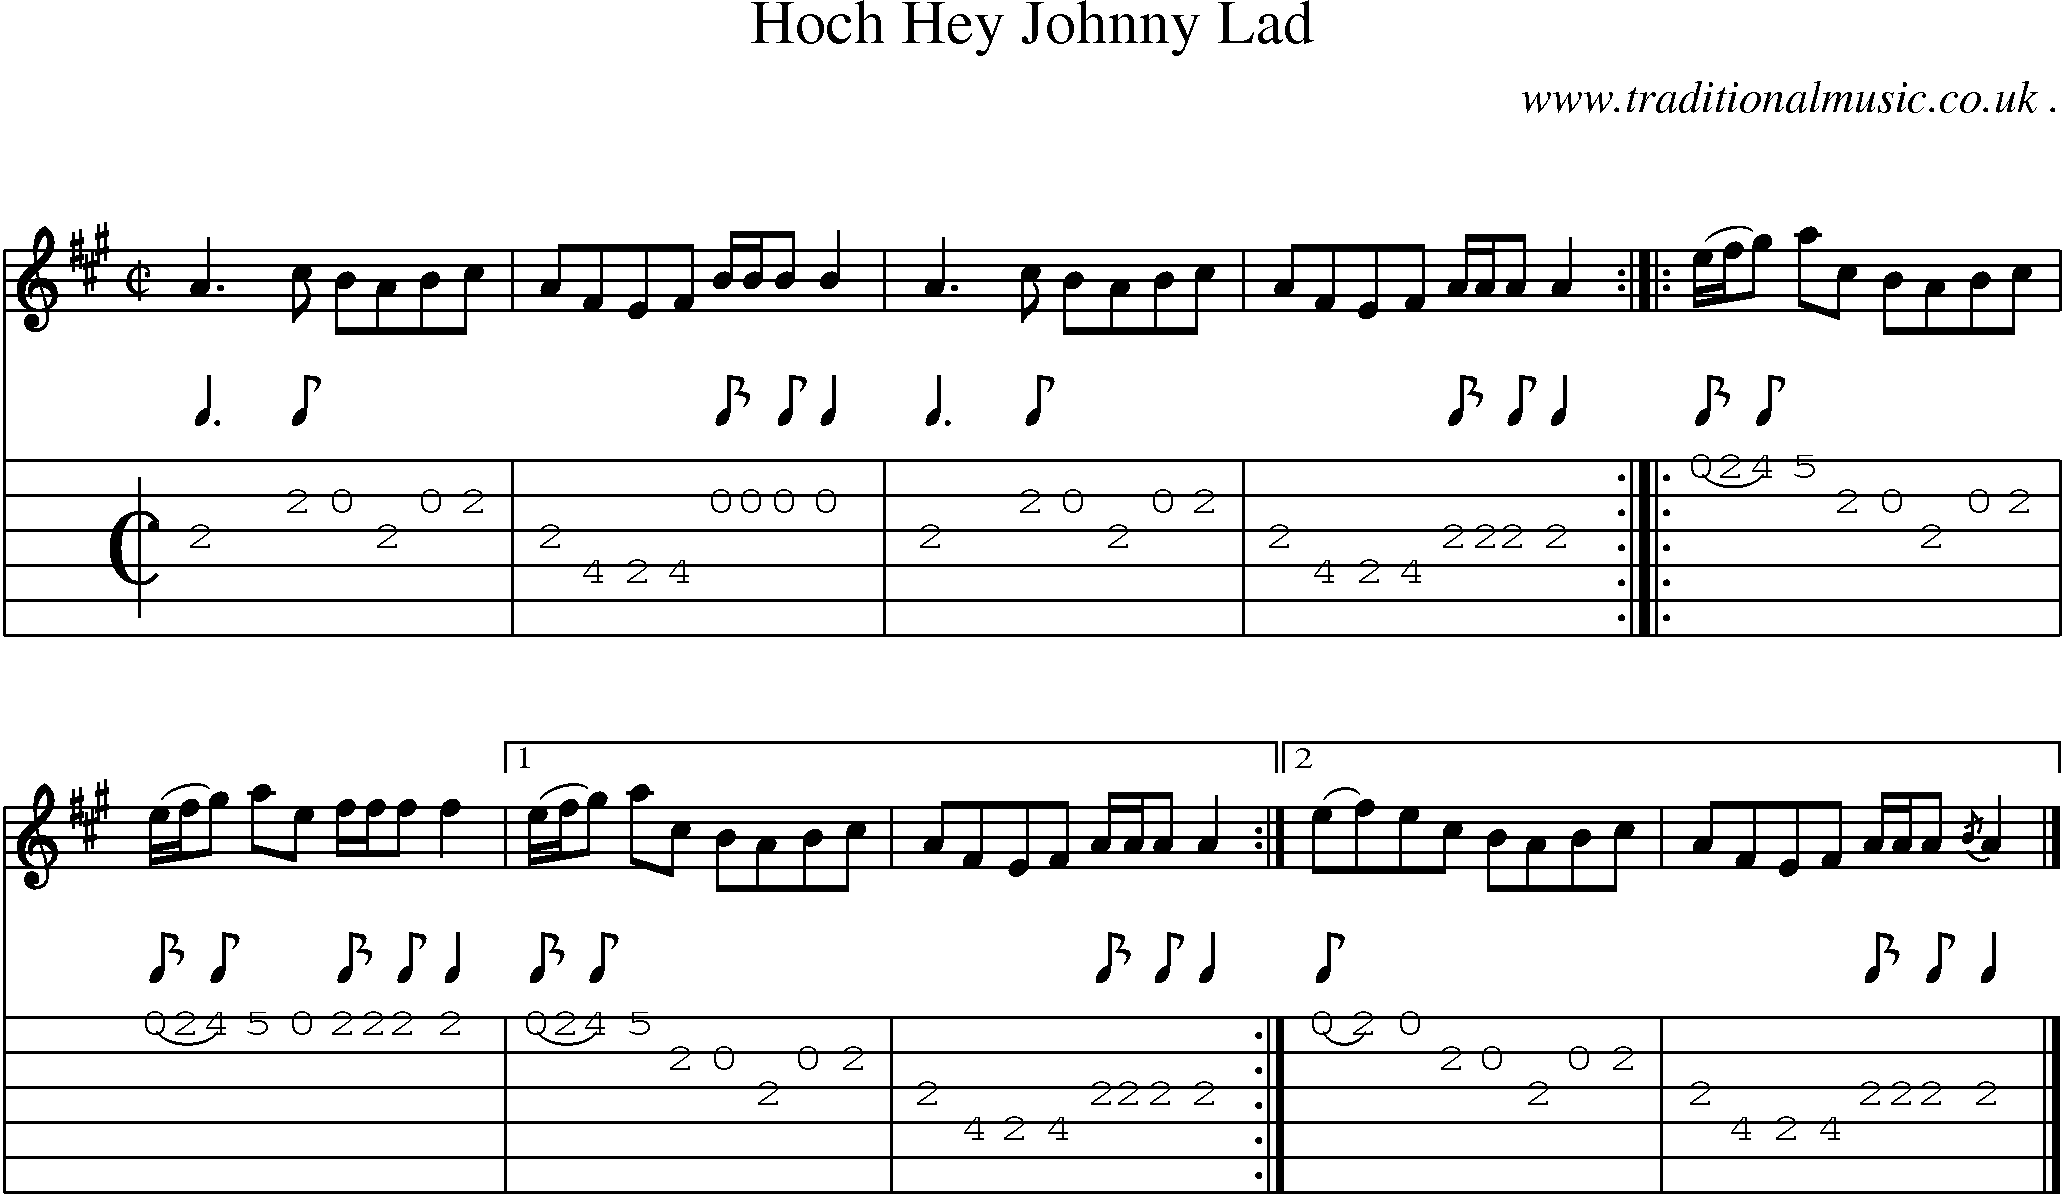 Sheet-music  score, Chords and Guitar Tabs for Hoch Hey Johnny Lad